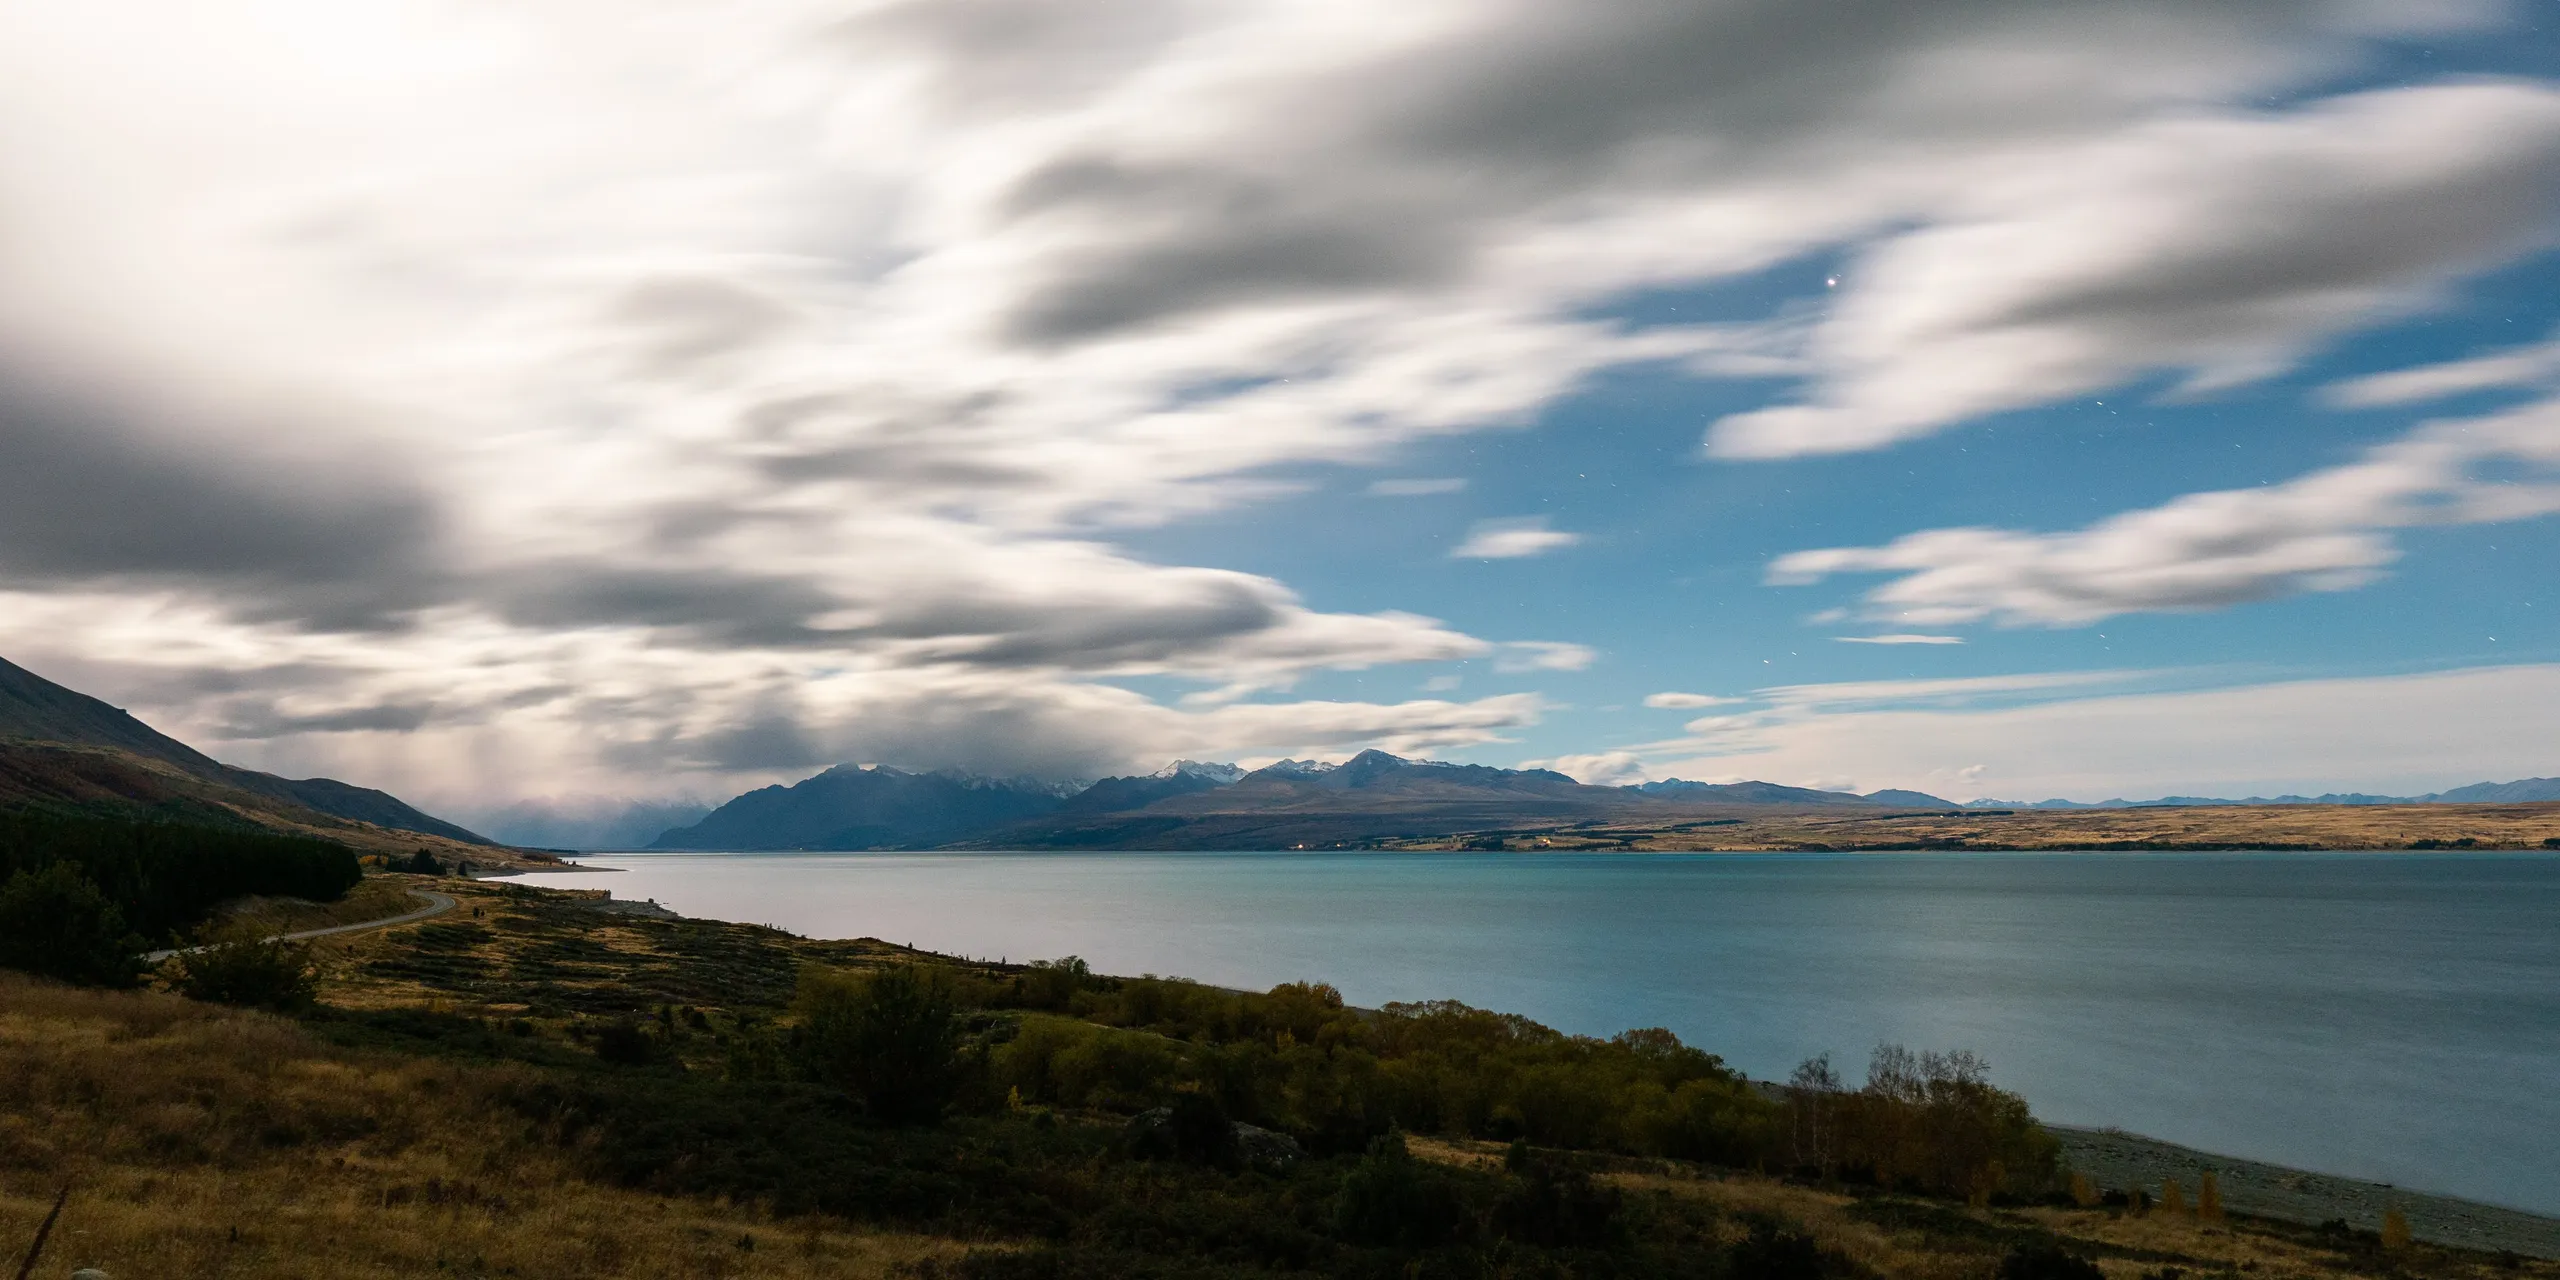 We stopped shortly before Aoraki to take some photos across Lake Pukaki. The weather forecast was ominous; sure enough, we arrived at the campsite around 10pm to pouring rain.